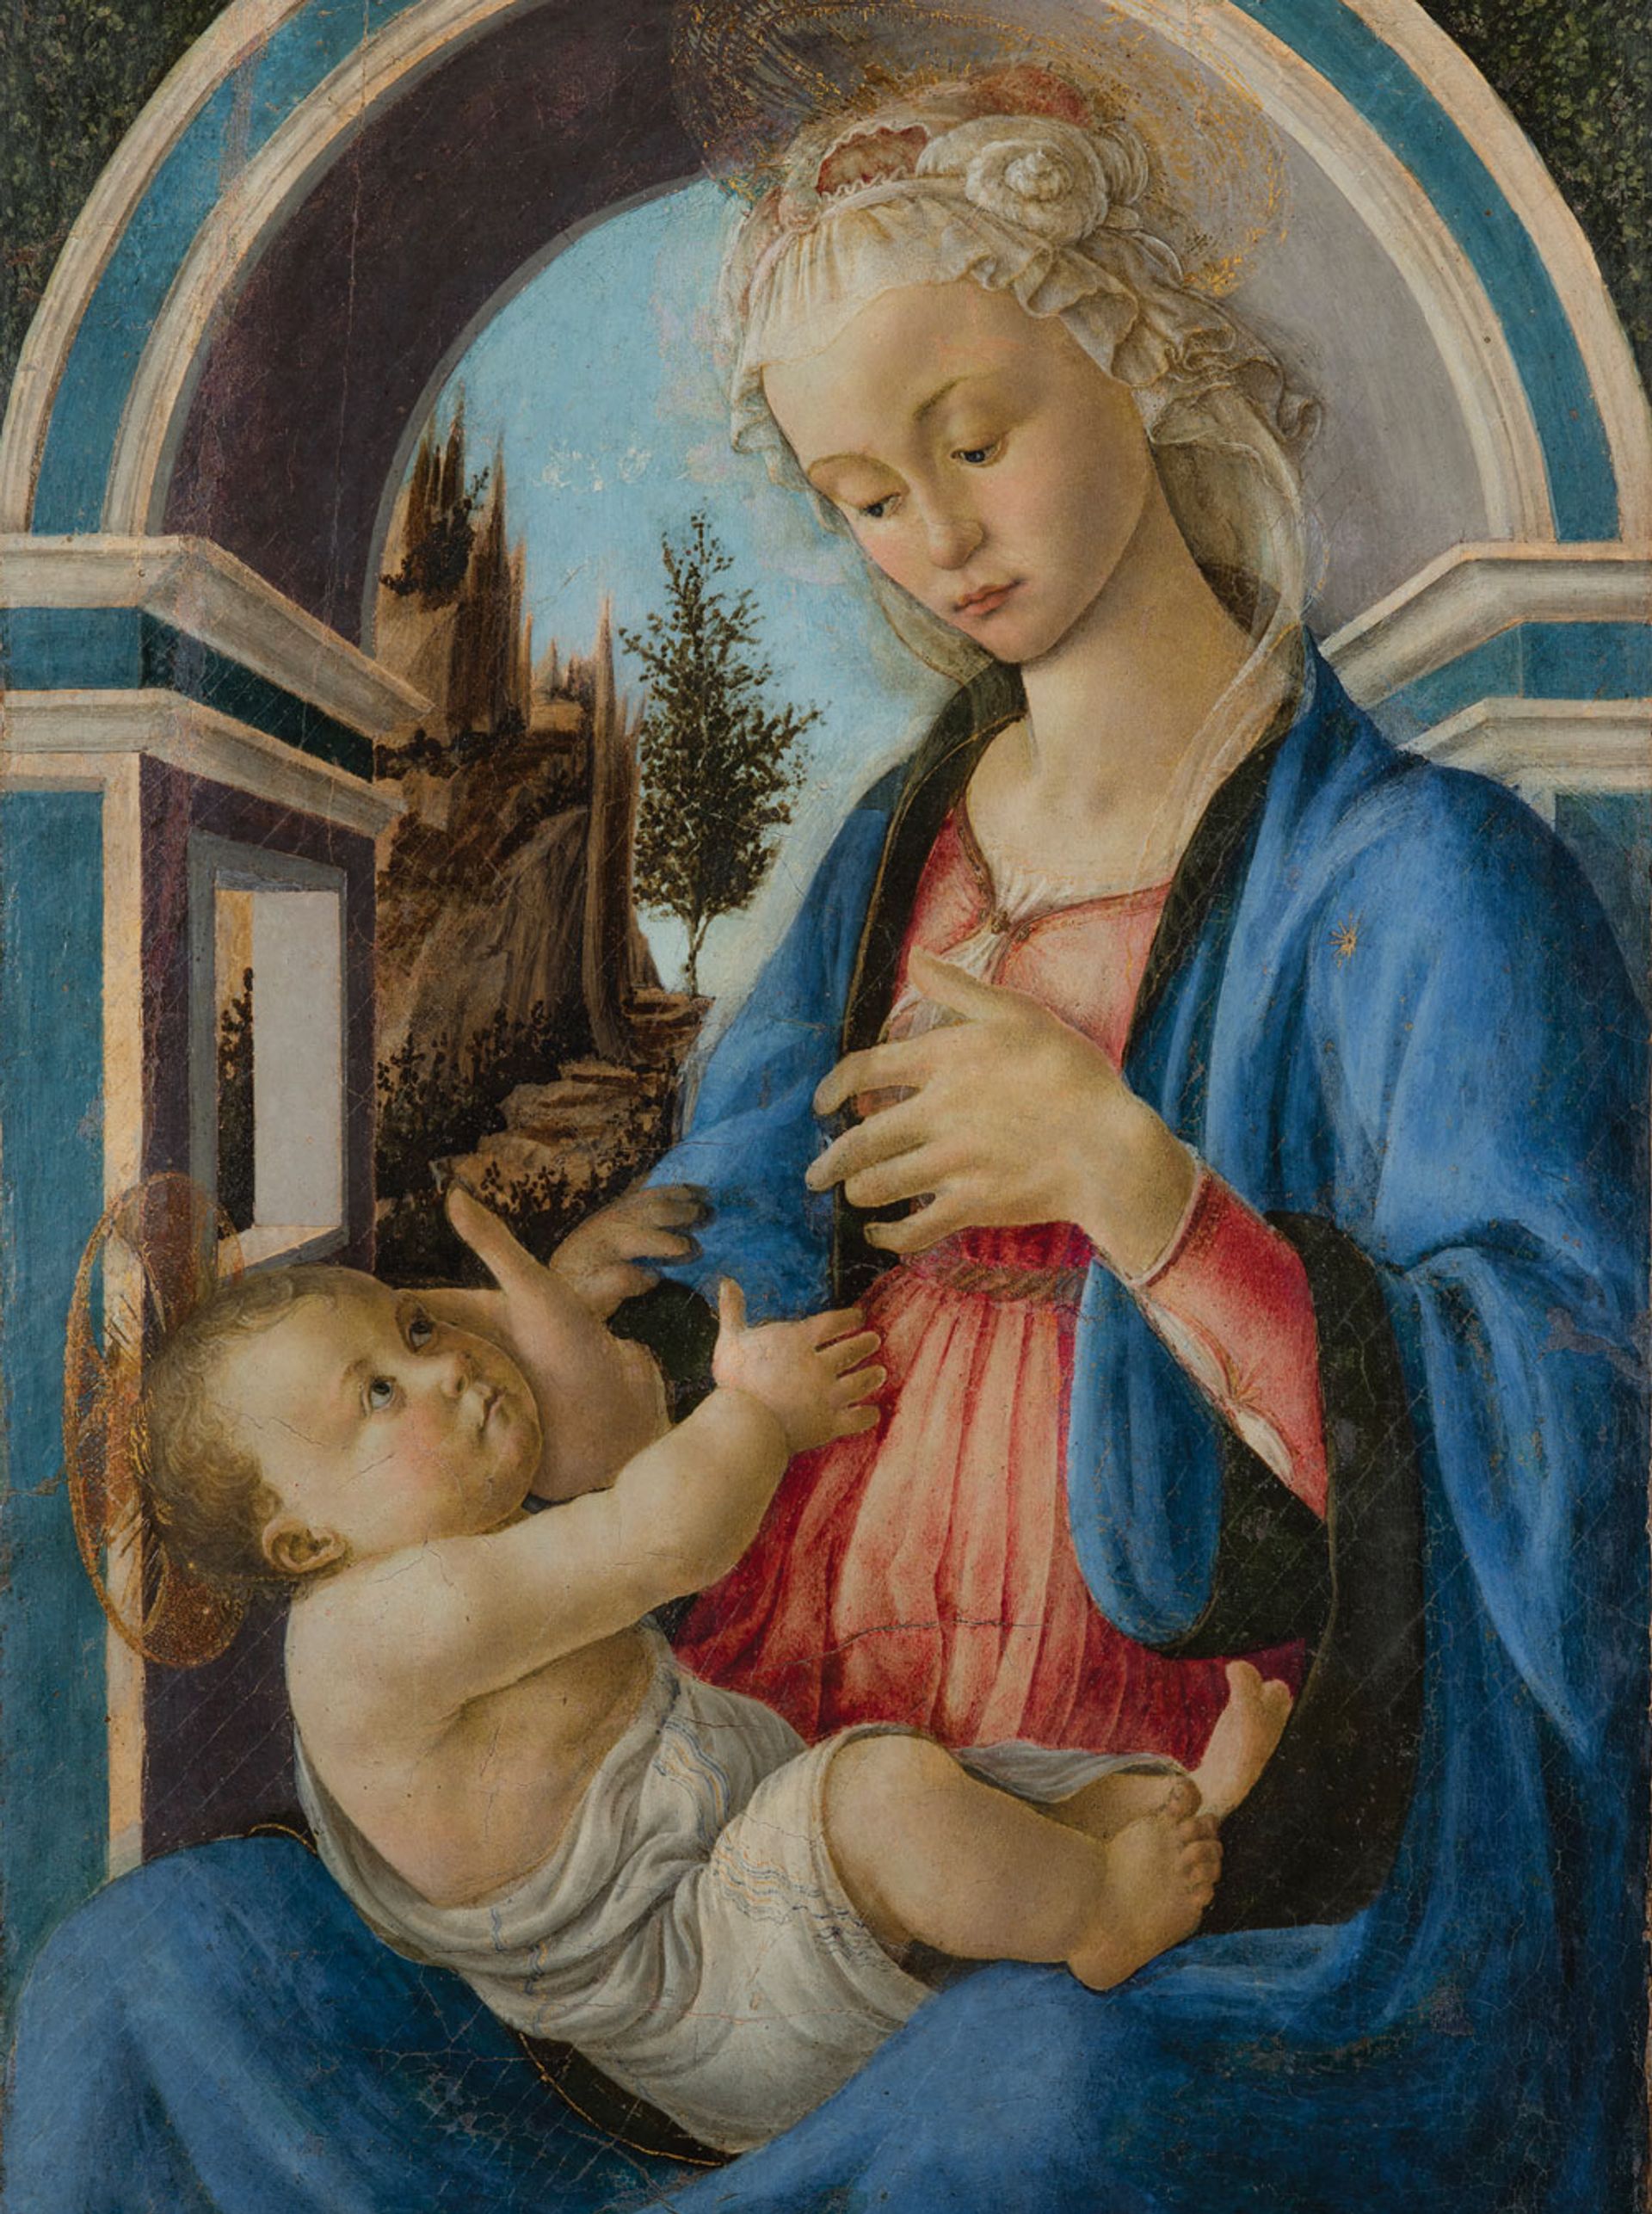 Botticelli’s Madonna with Child (around 1467) was one of Campana’s 12,000 artefacts Photo © Fabrice-Lepeltier